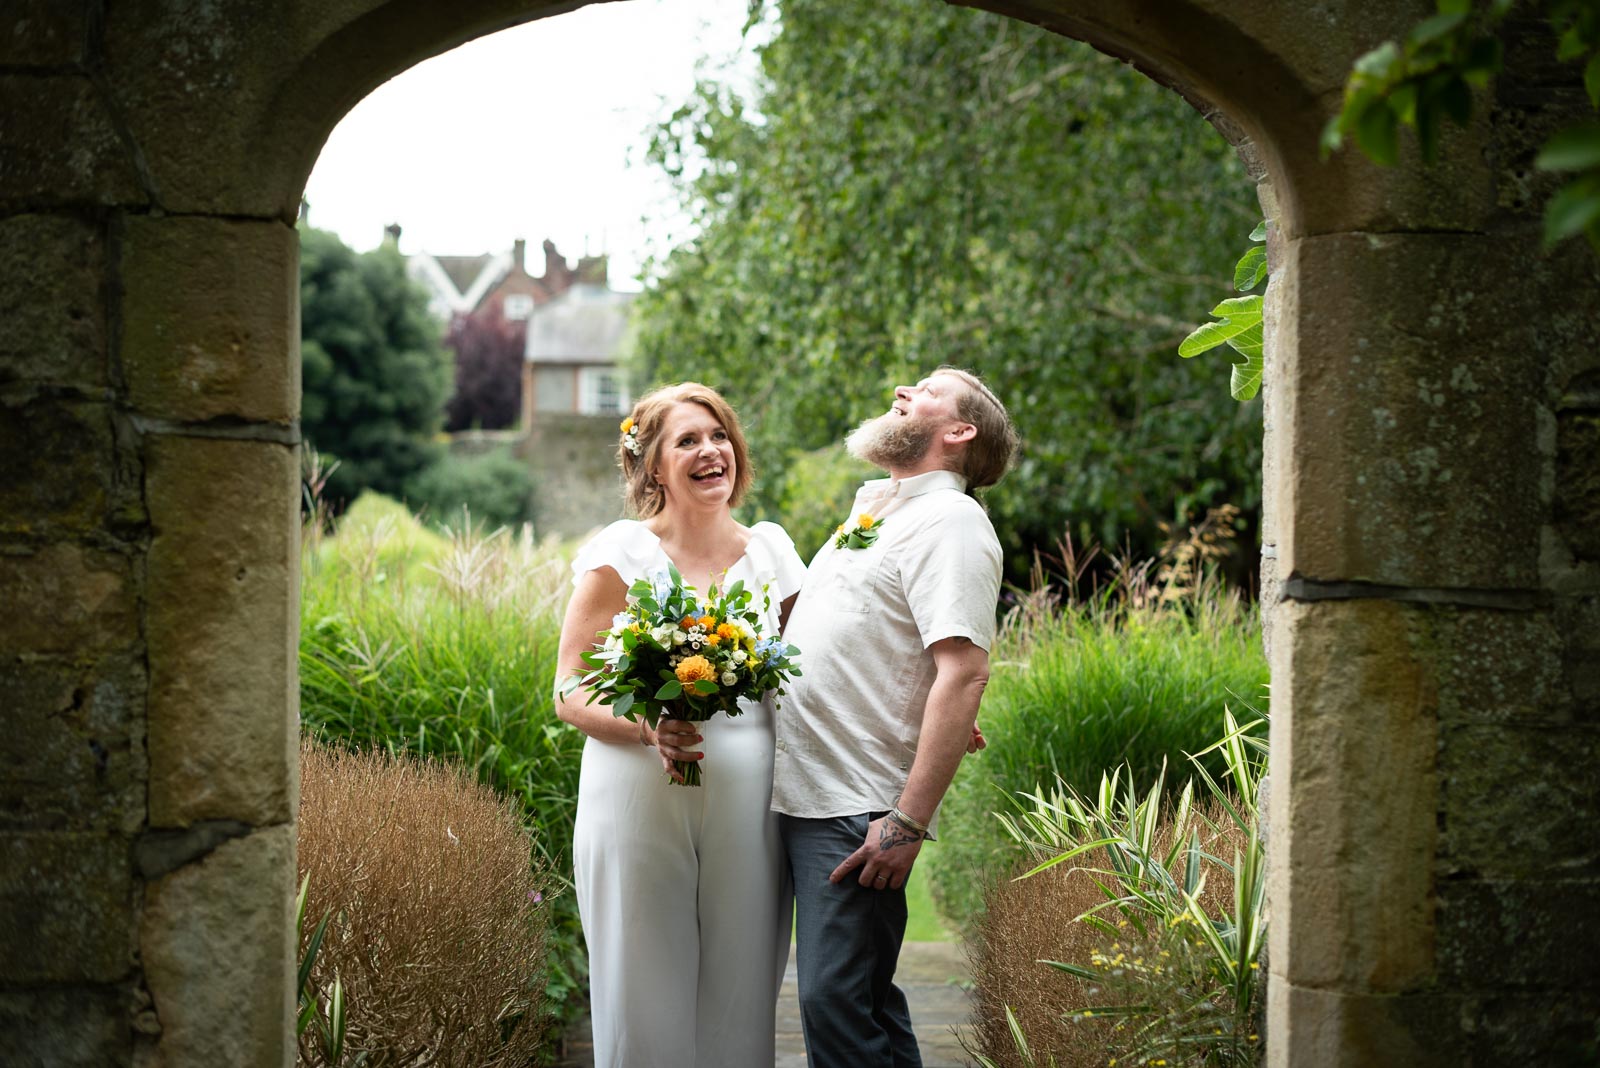 Wedding Photographer for Mary and Mark at Lewes Registry Office